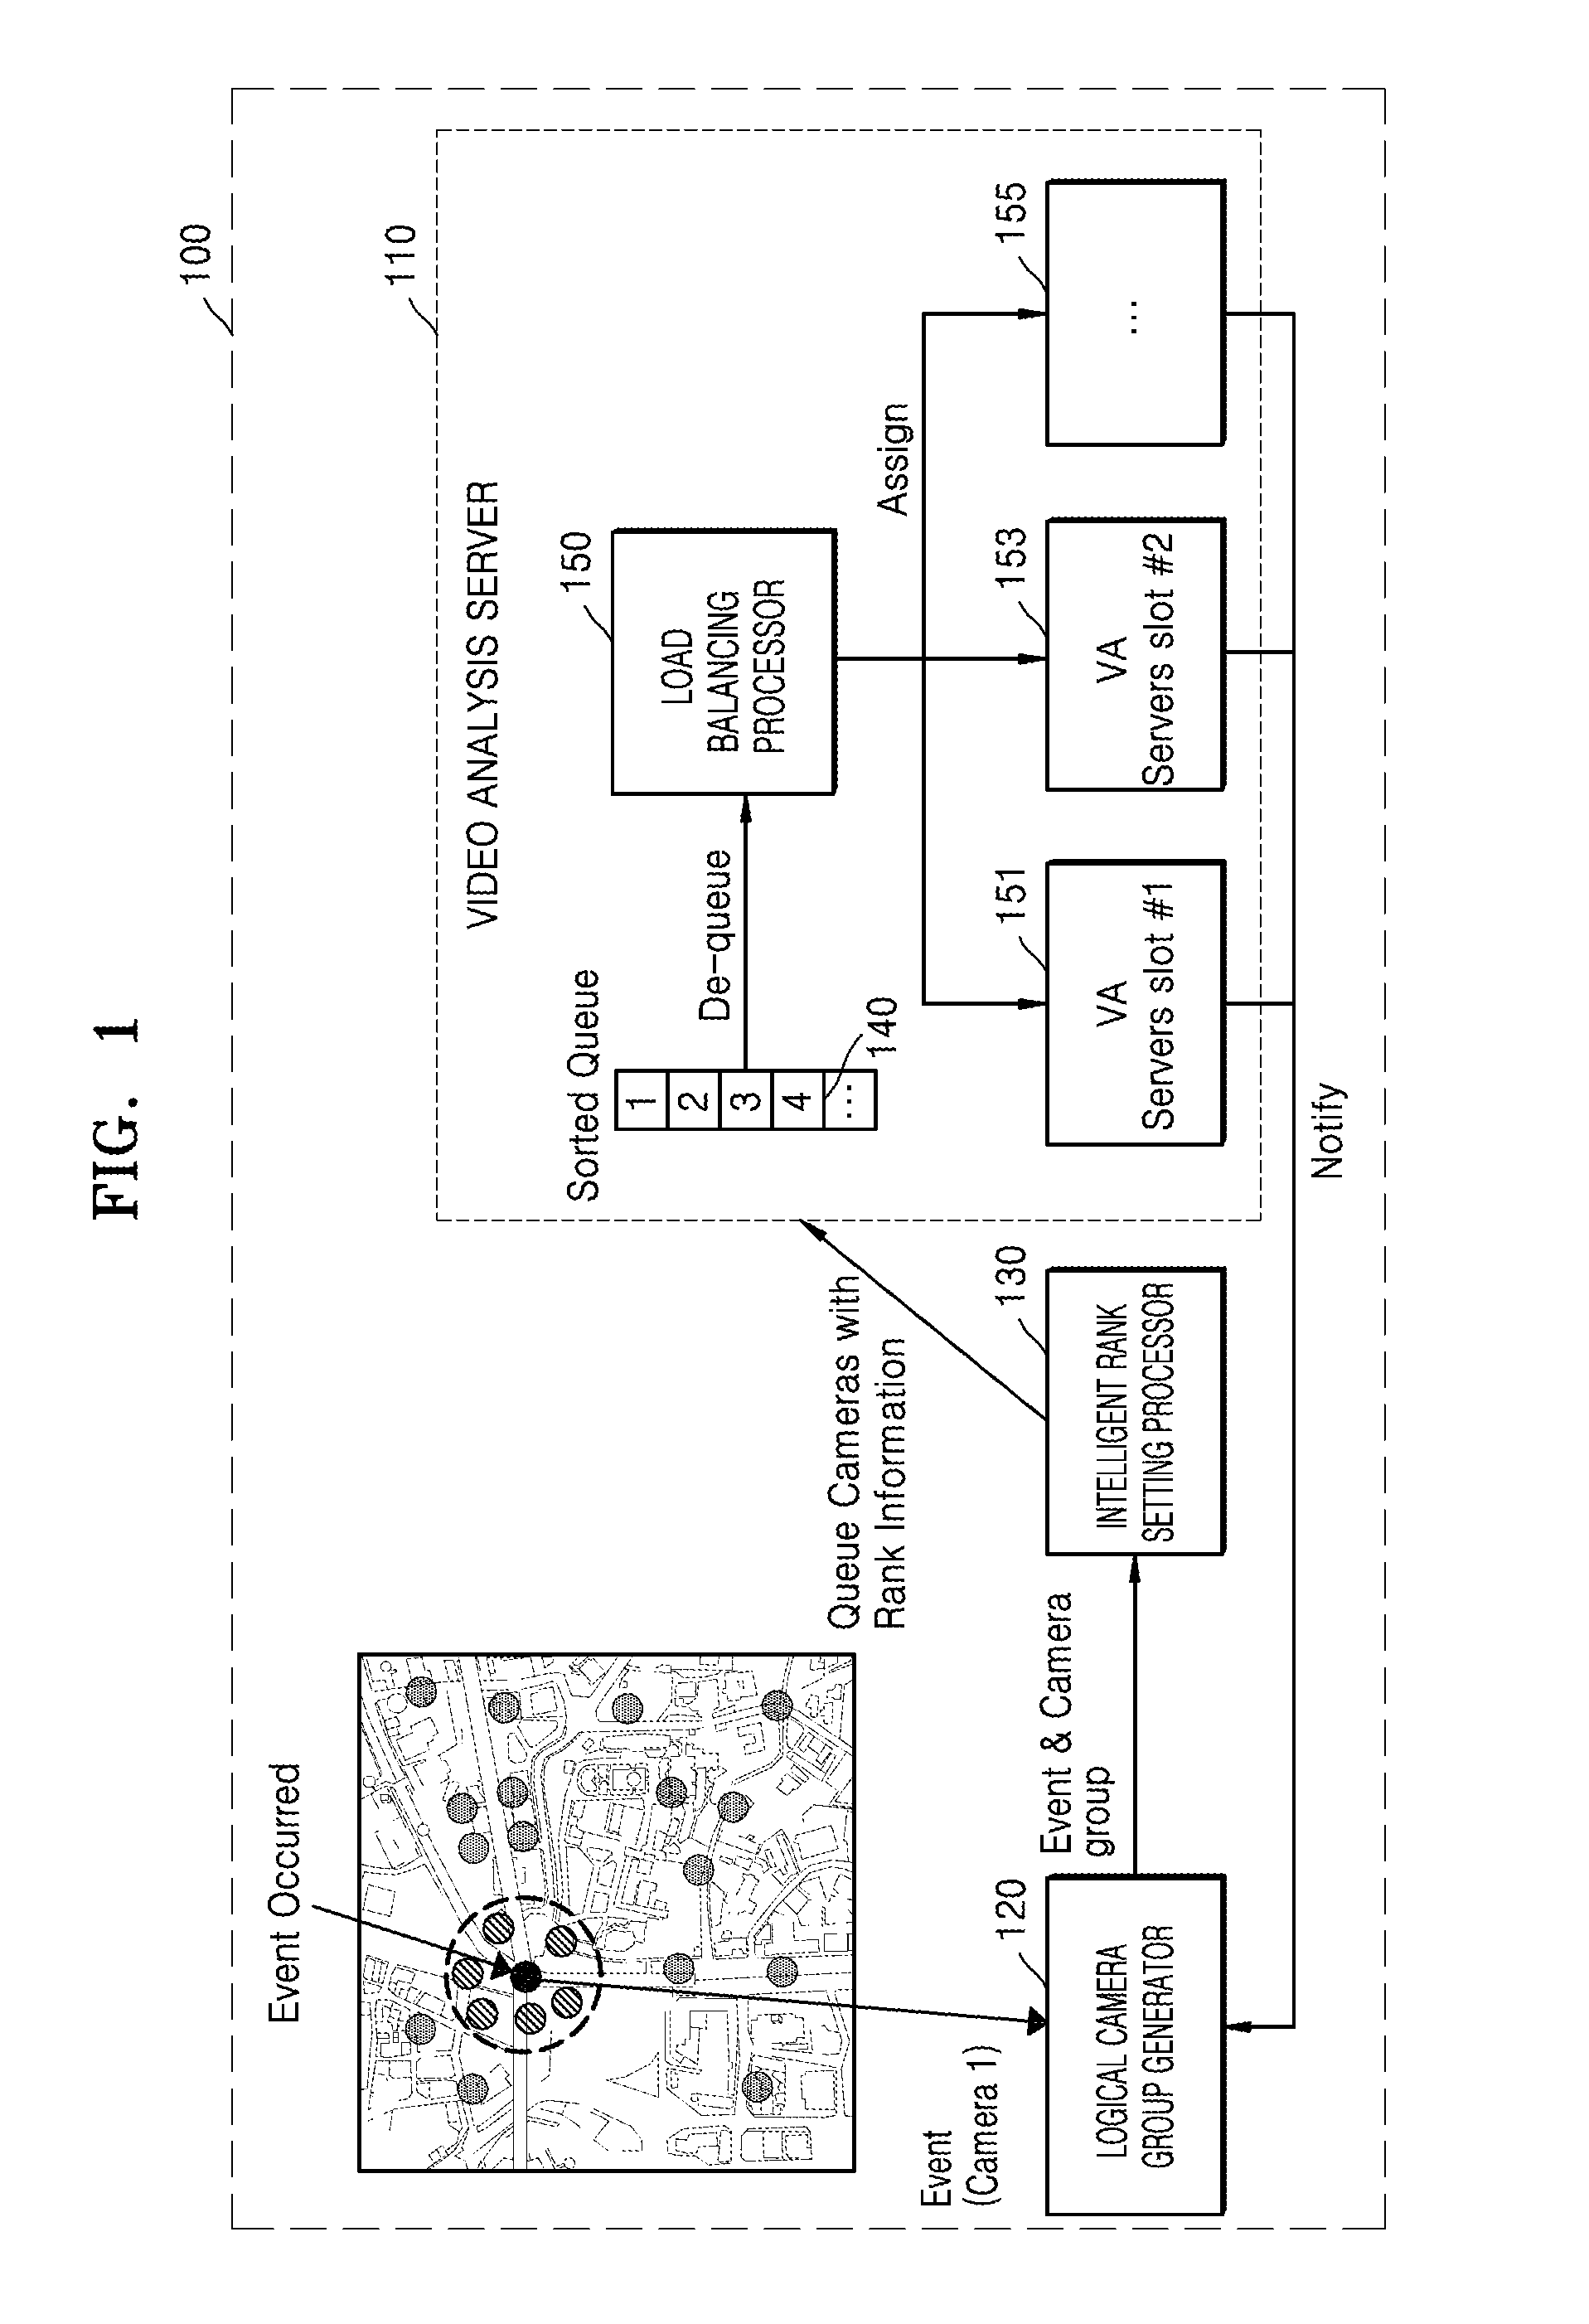 Intelligent video analysis system and method